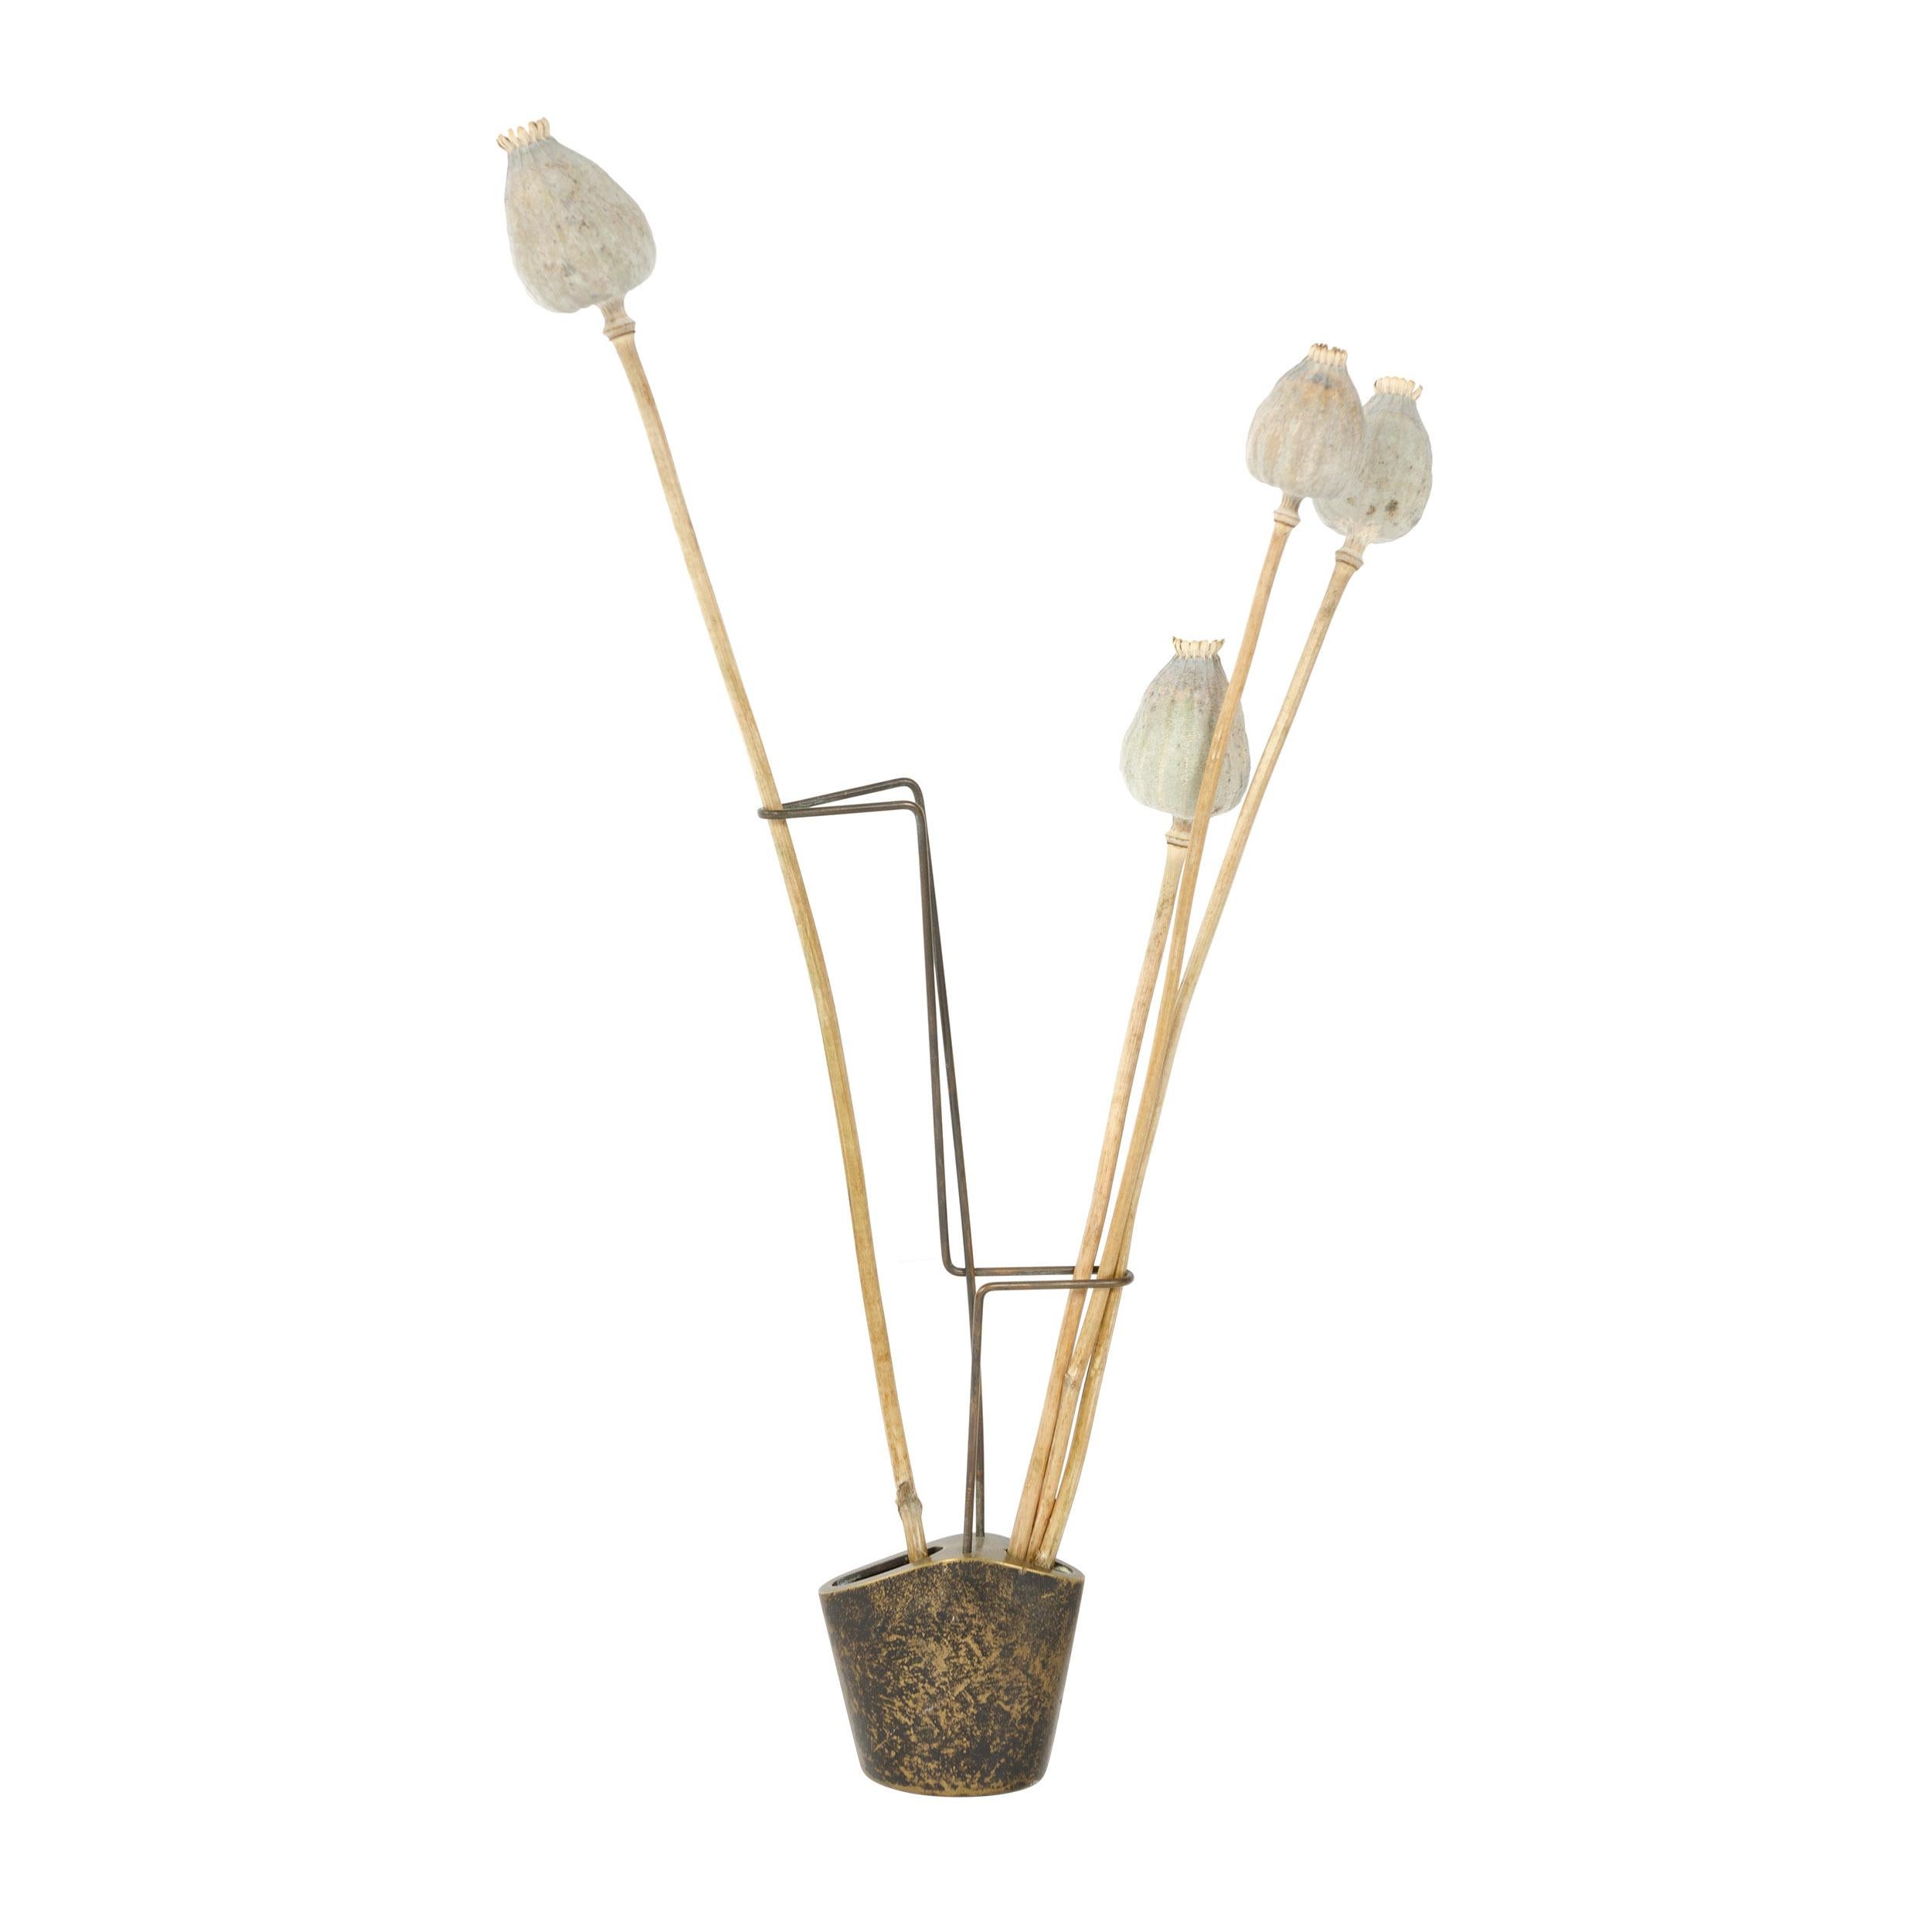 A Mid-Century Modern bud vase by Carl Aubock with an asymmetrical, patinated bronze base supporting a brass wire armature. Made in Austria, circa 1940s.